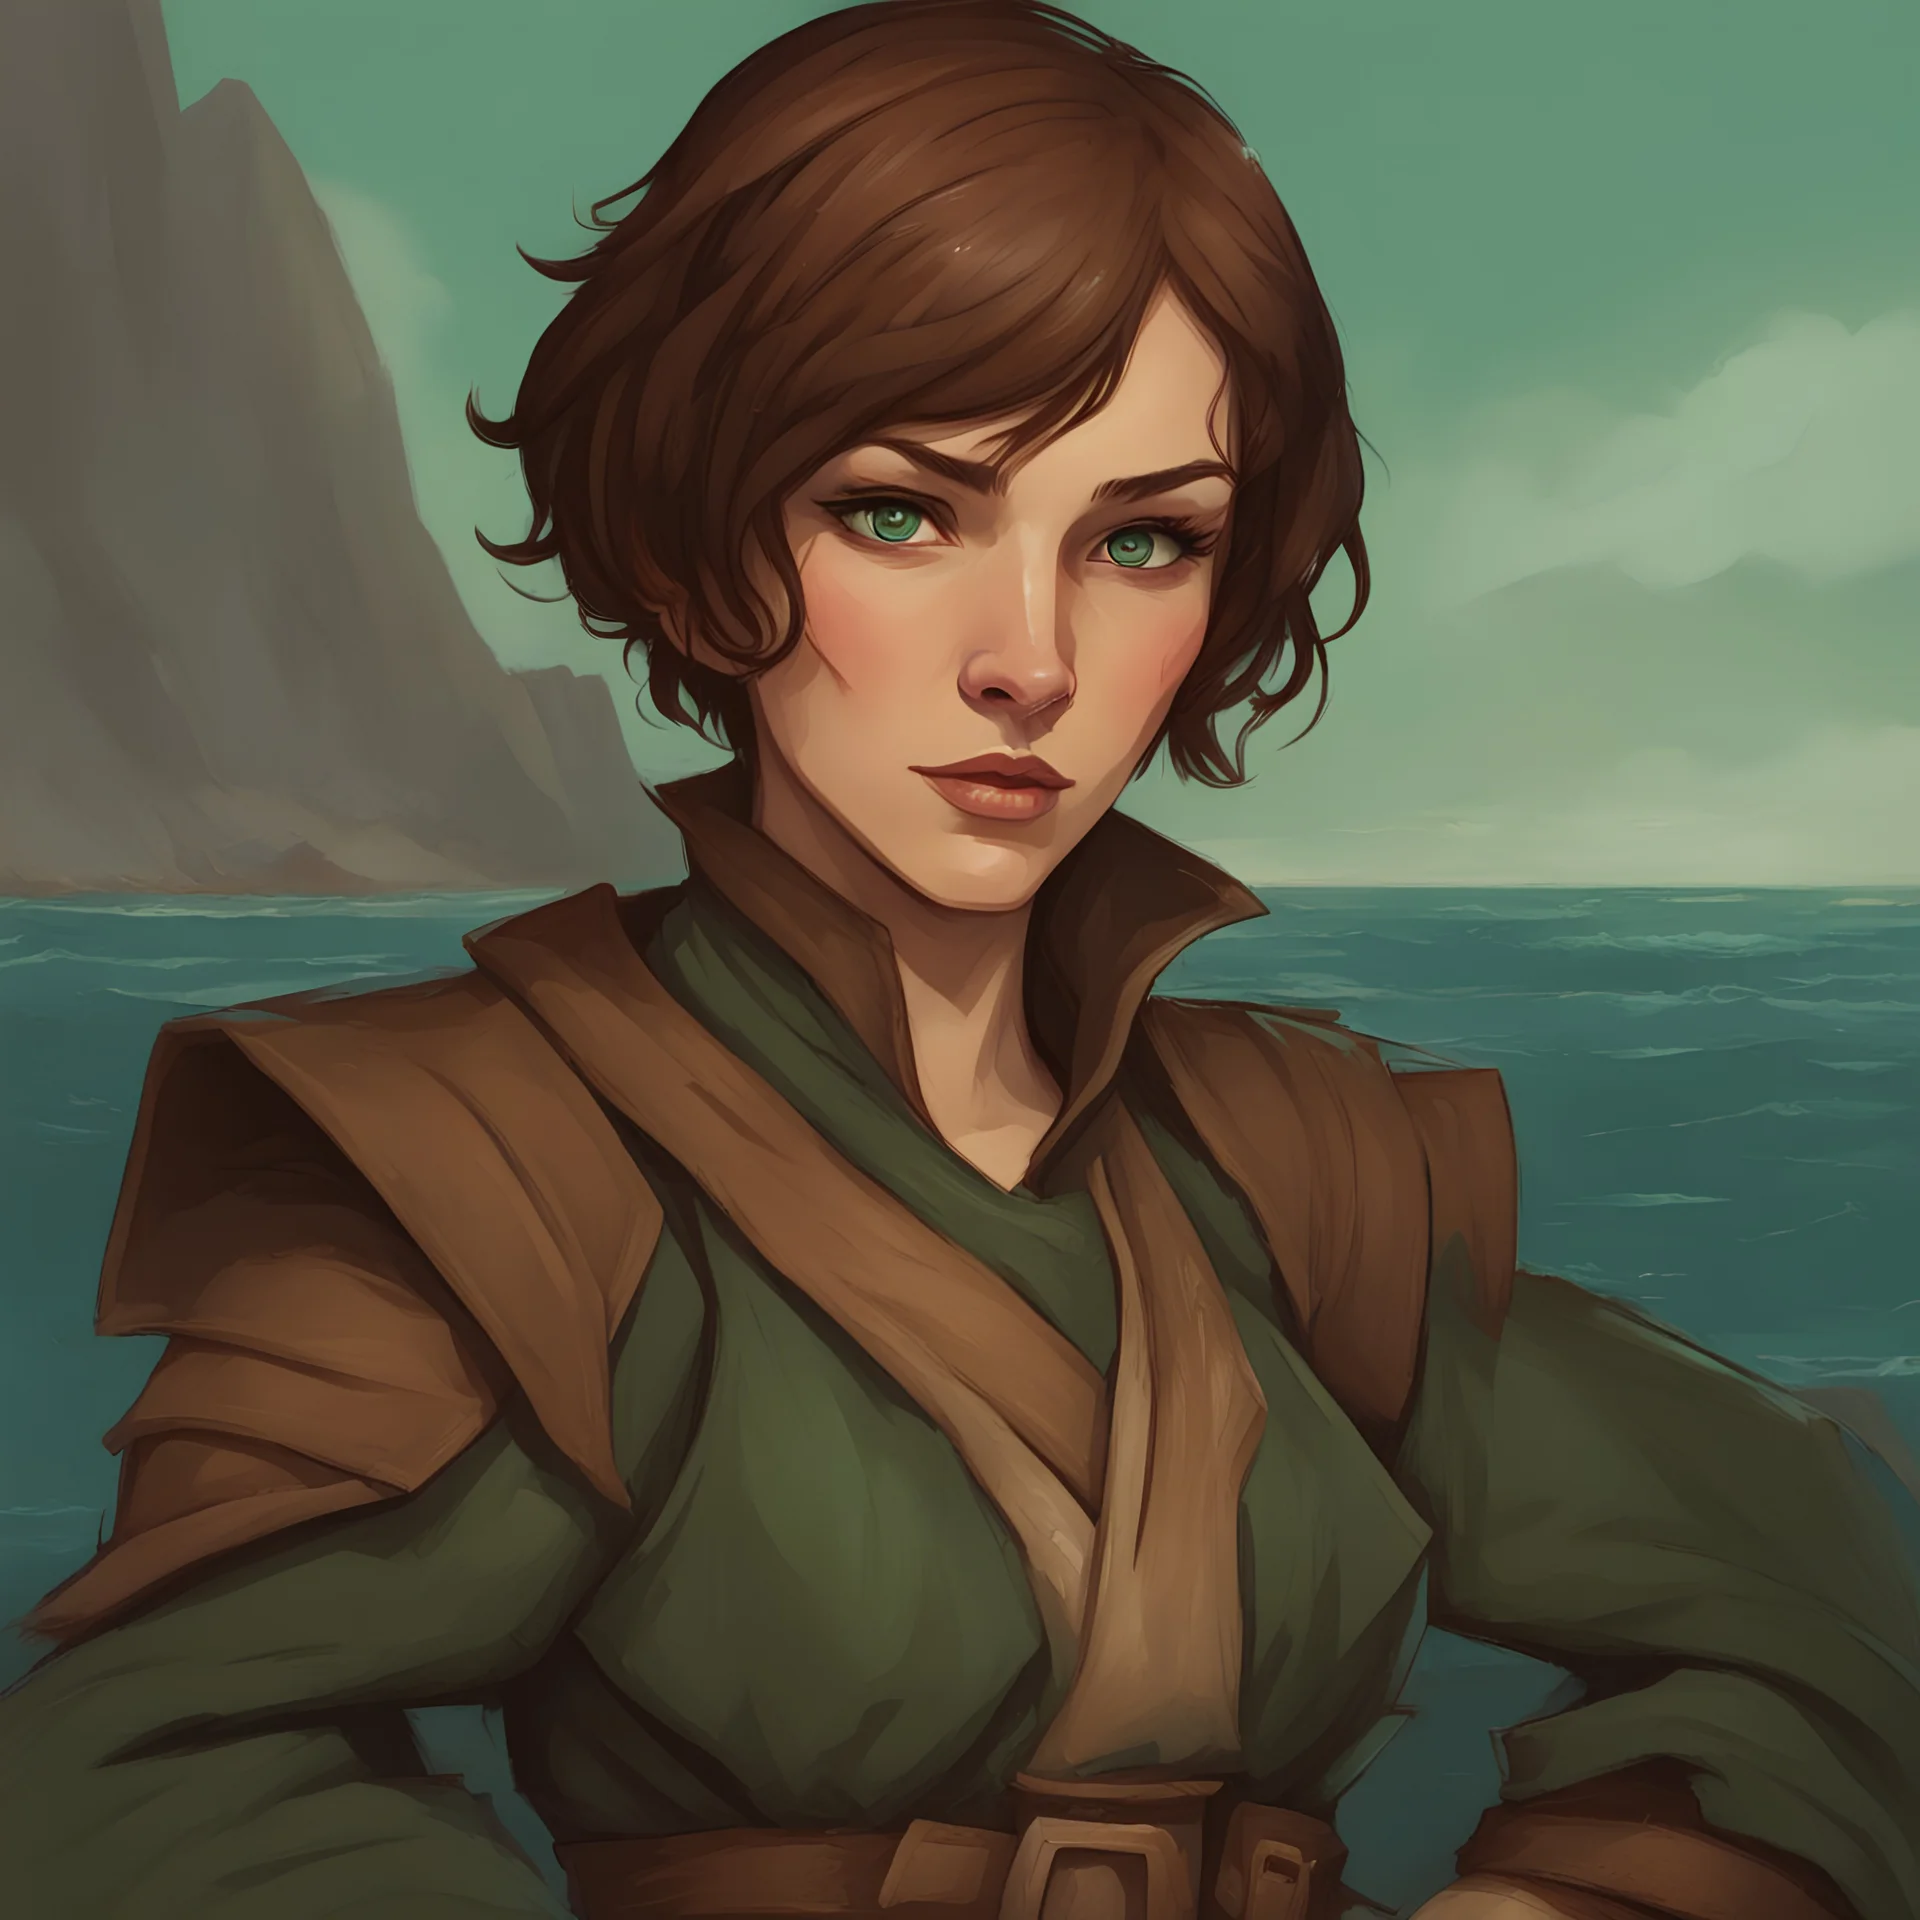 portrait; solid background; dungeons and dragons; human; female; short brown hair; sea green eyes; the fathomless; clothes for sea travel